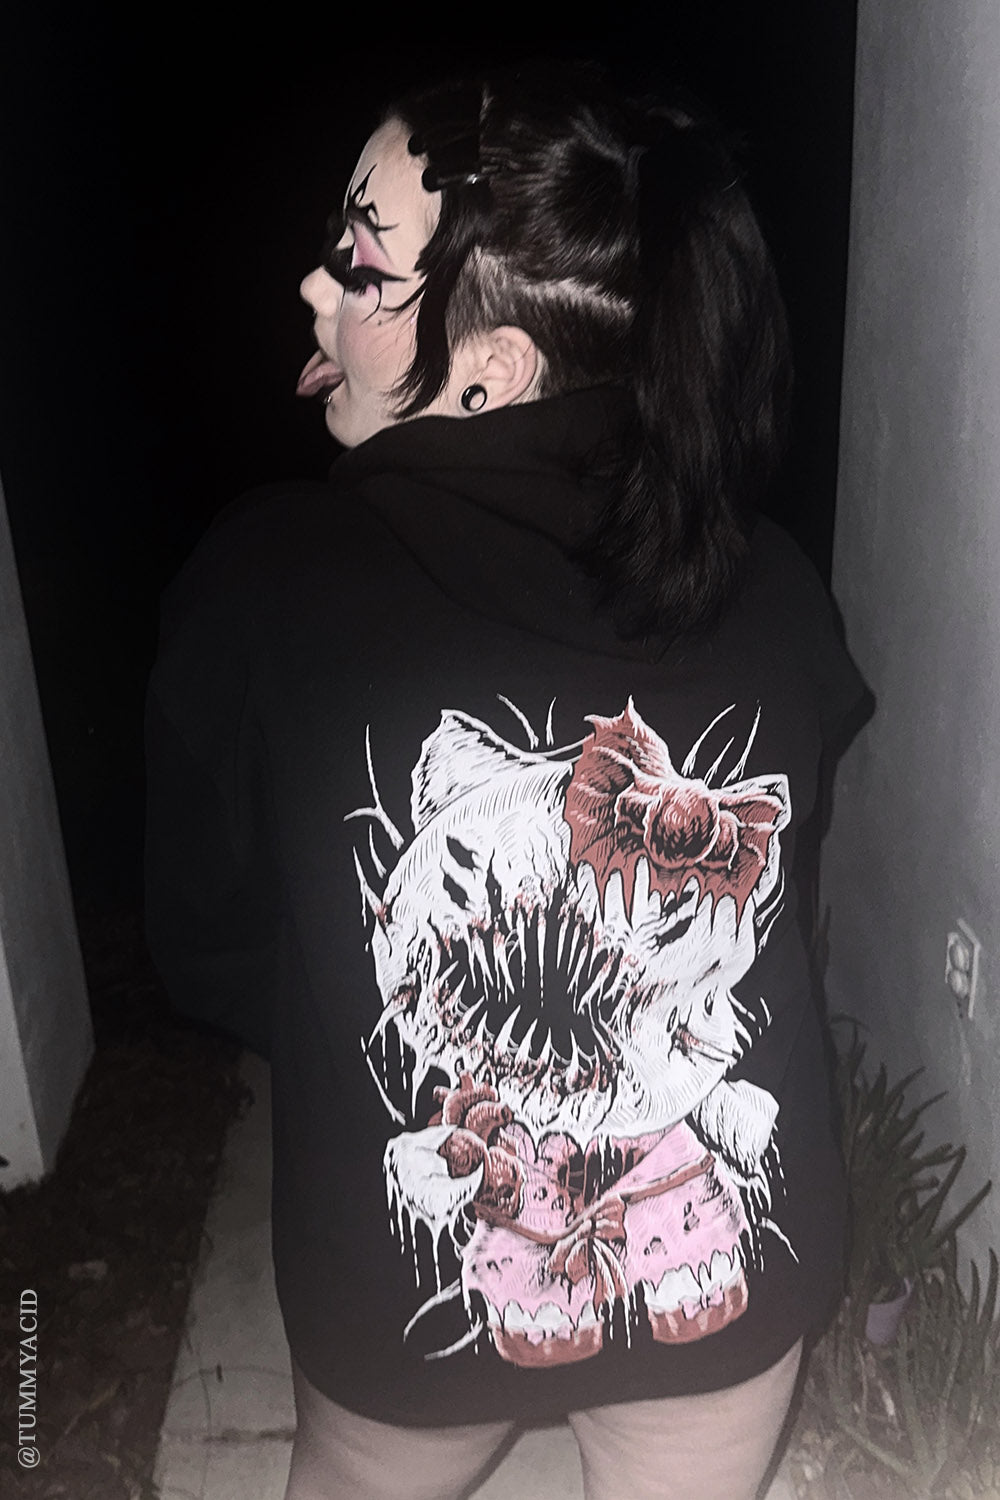 Hell Kitty Hoodie [Zipper or Pullover]